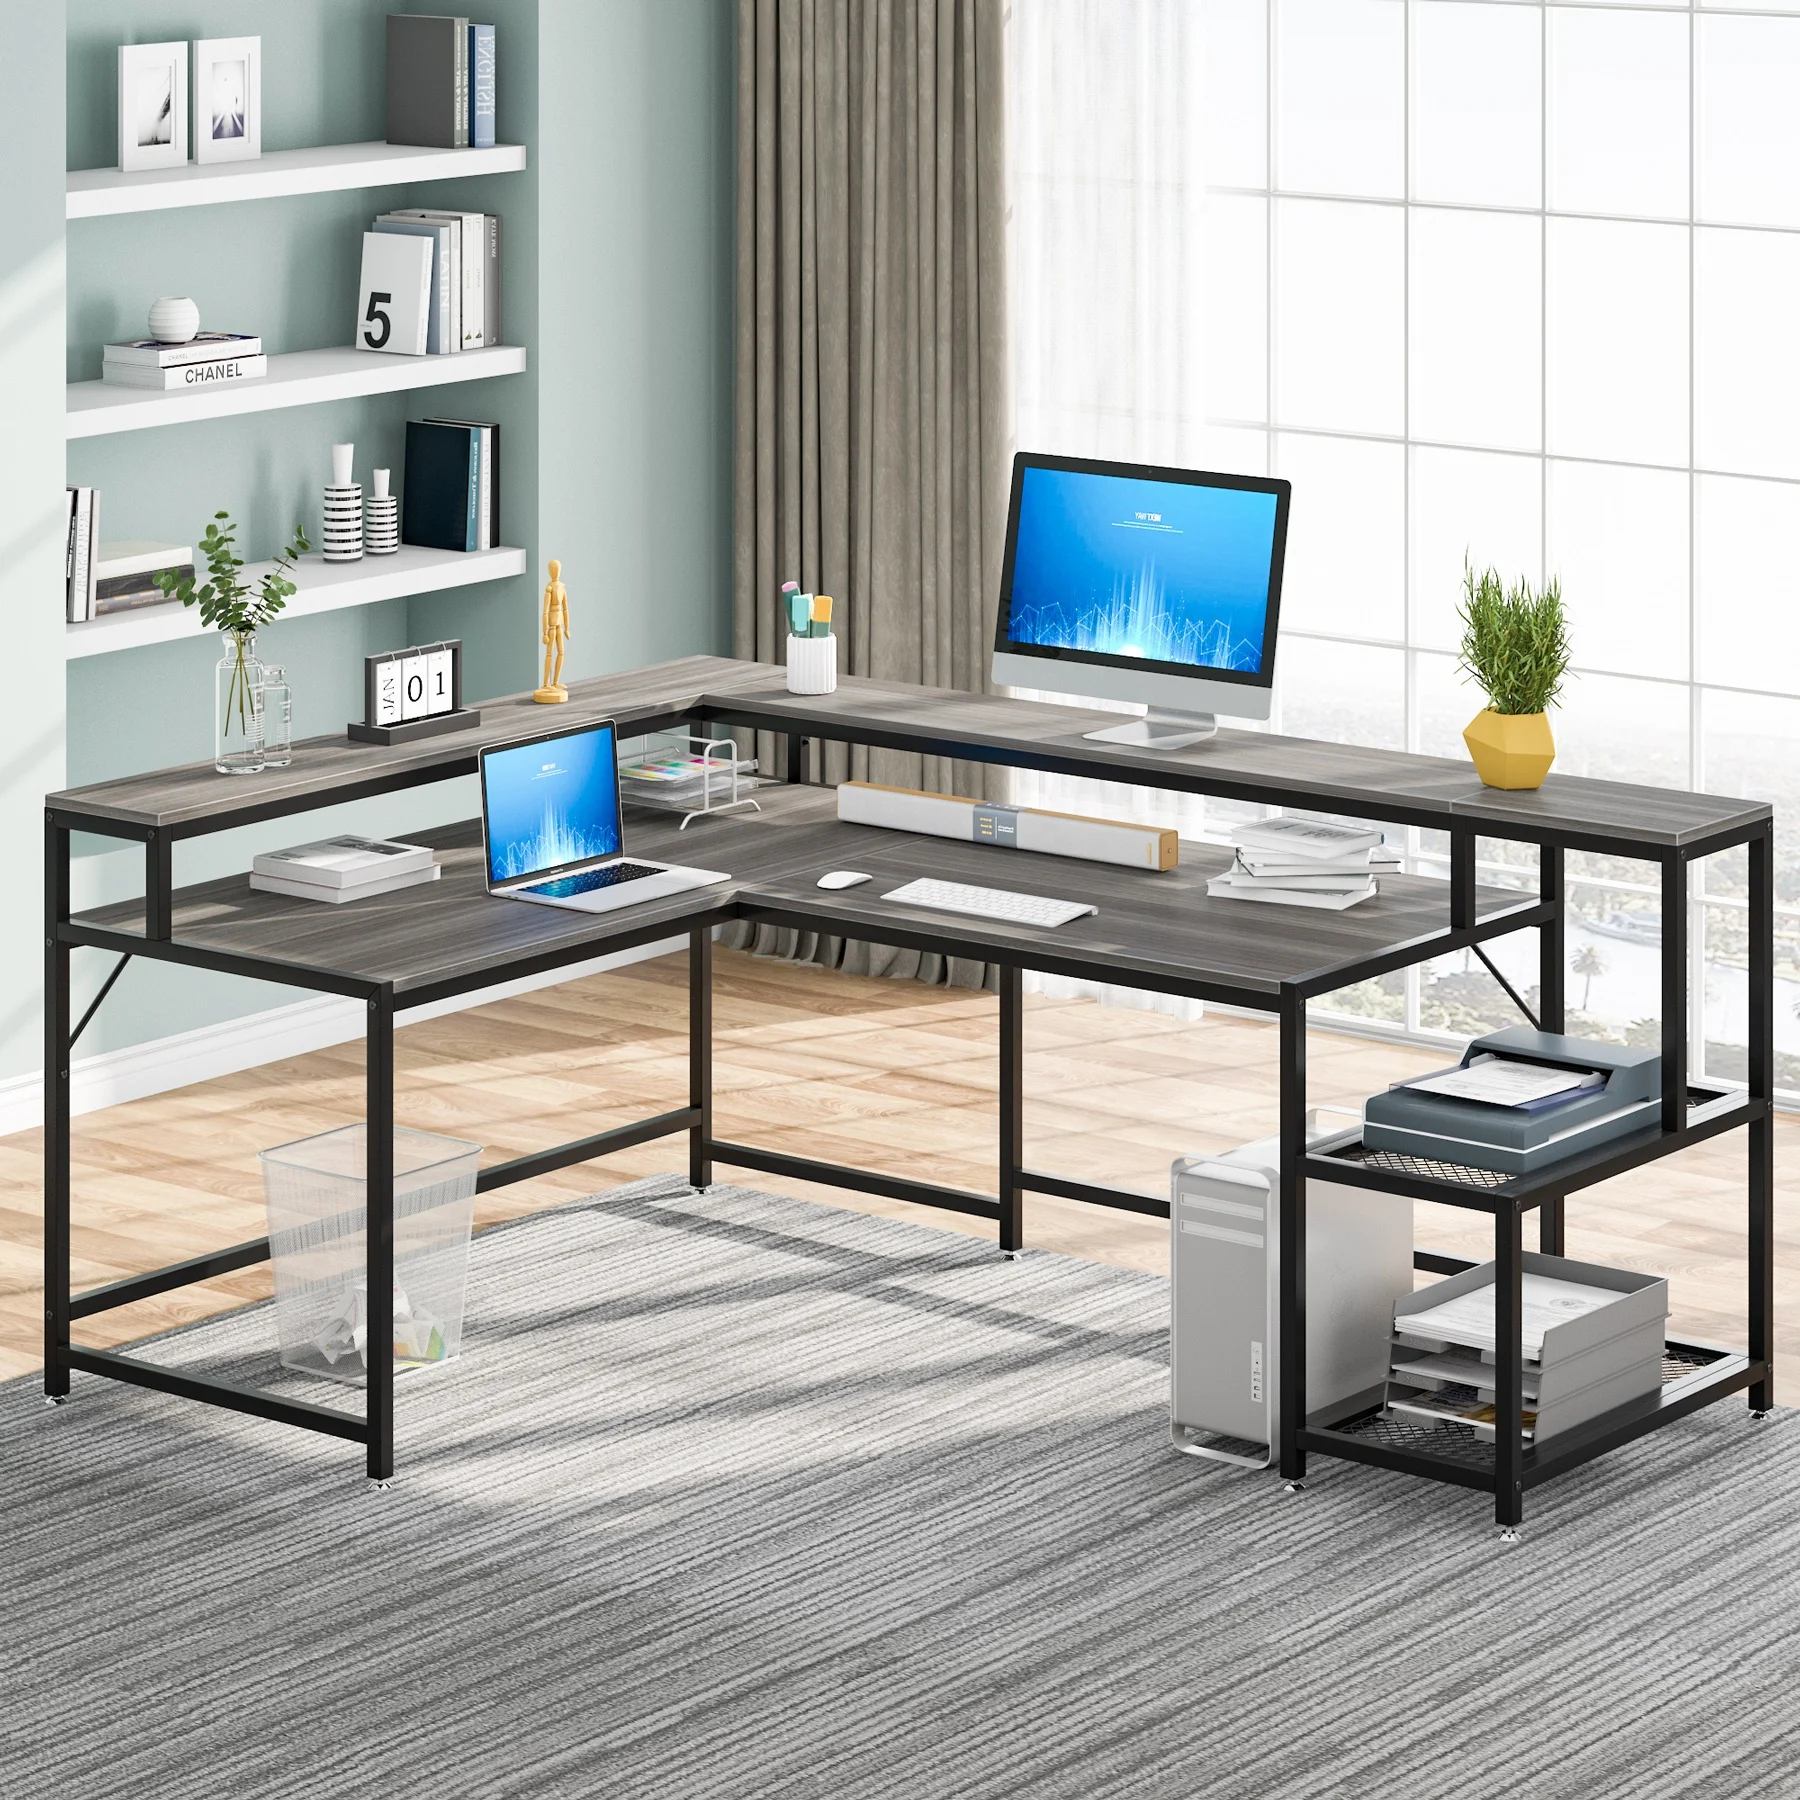 Tribesigns Gray L shape Industrial Computer Table Writing Desk working station for Home Office